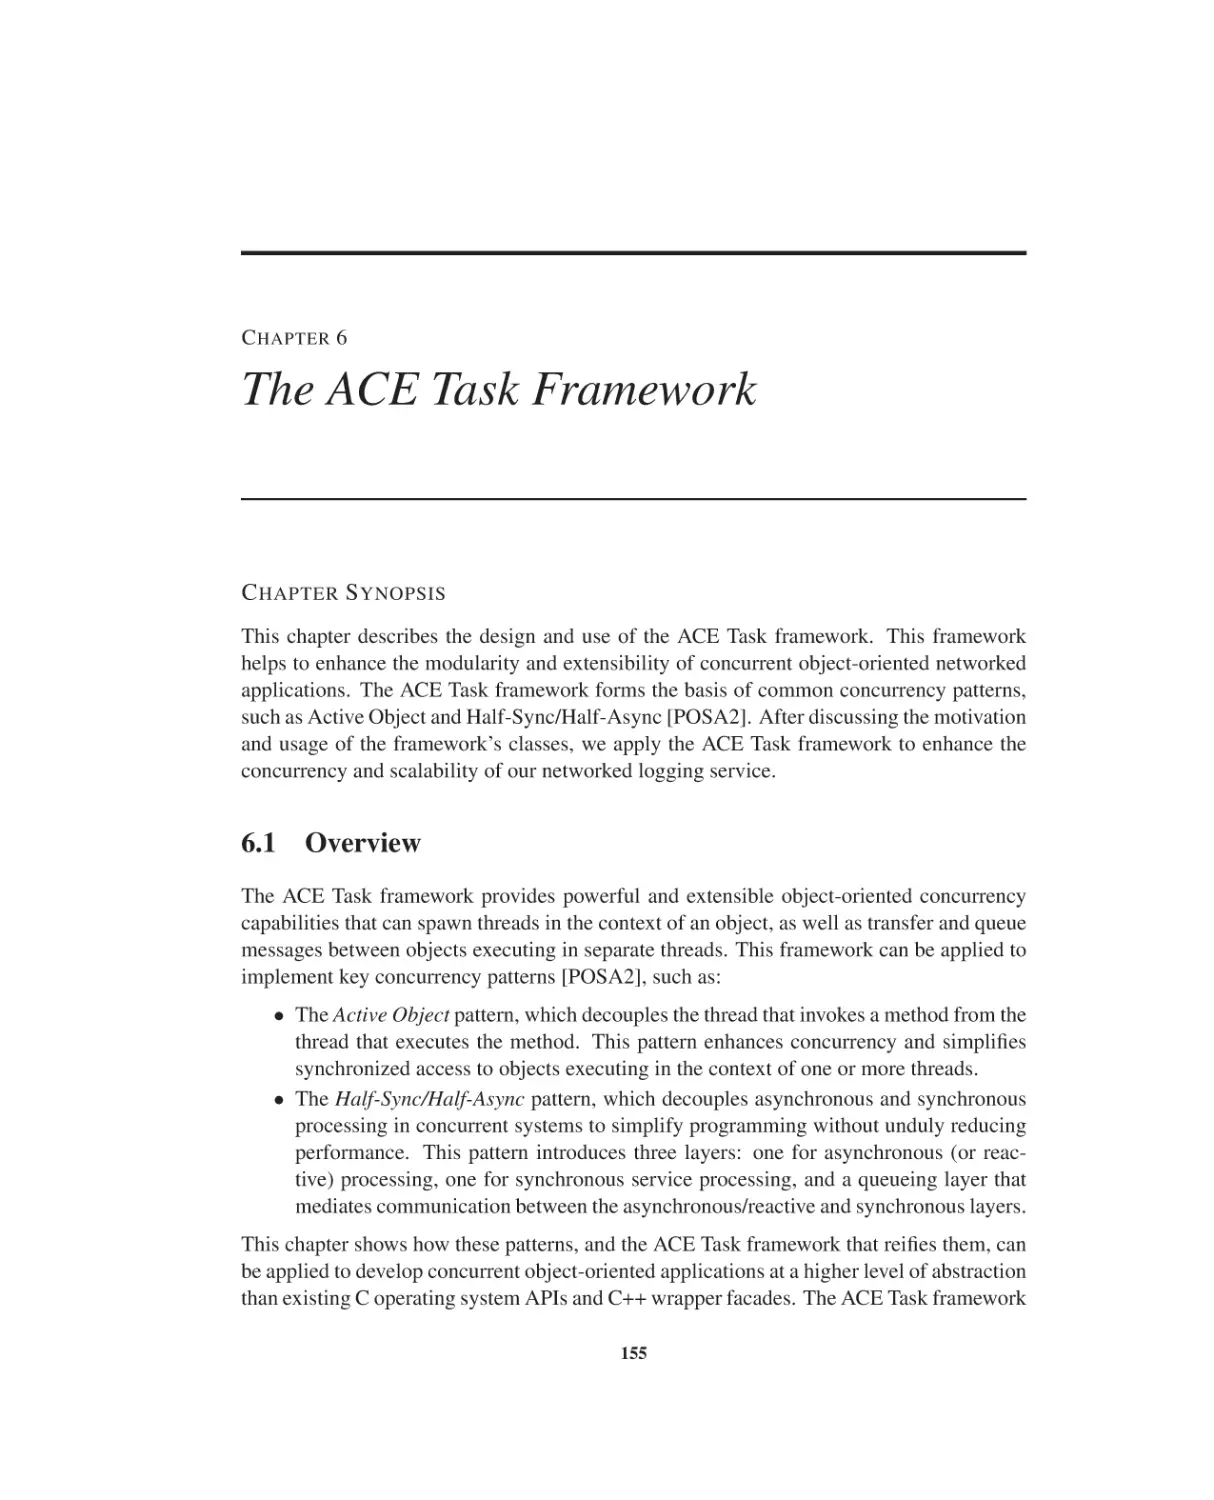 Chapter 6 The ACE Task Framework
6.1 Overview